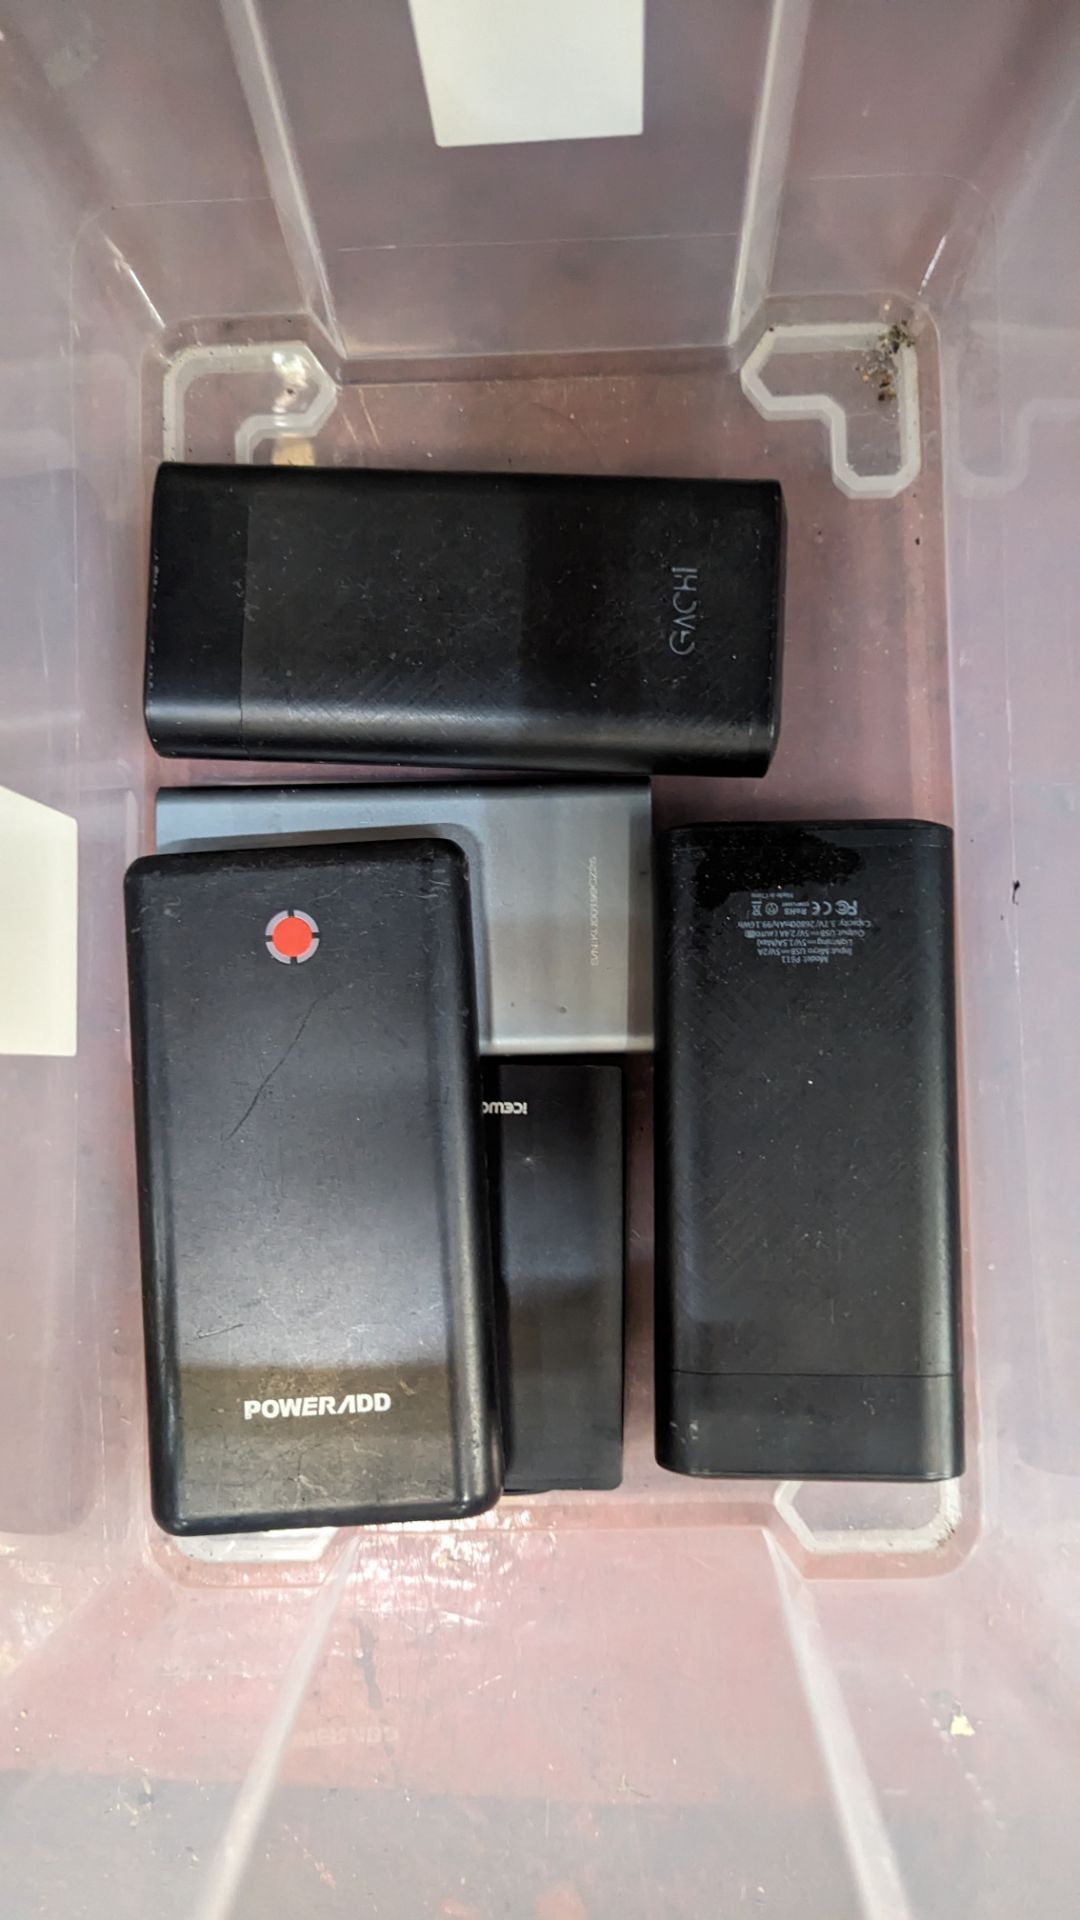 5 off portable power banks - Image 2 of 5